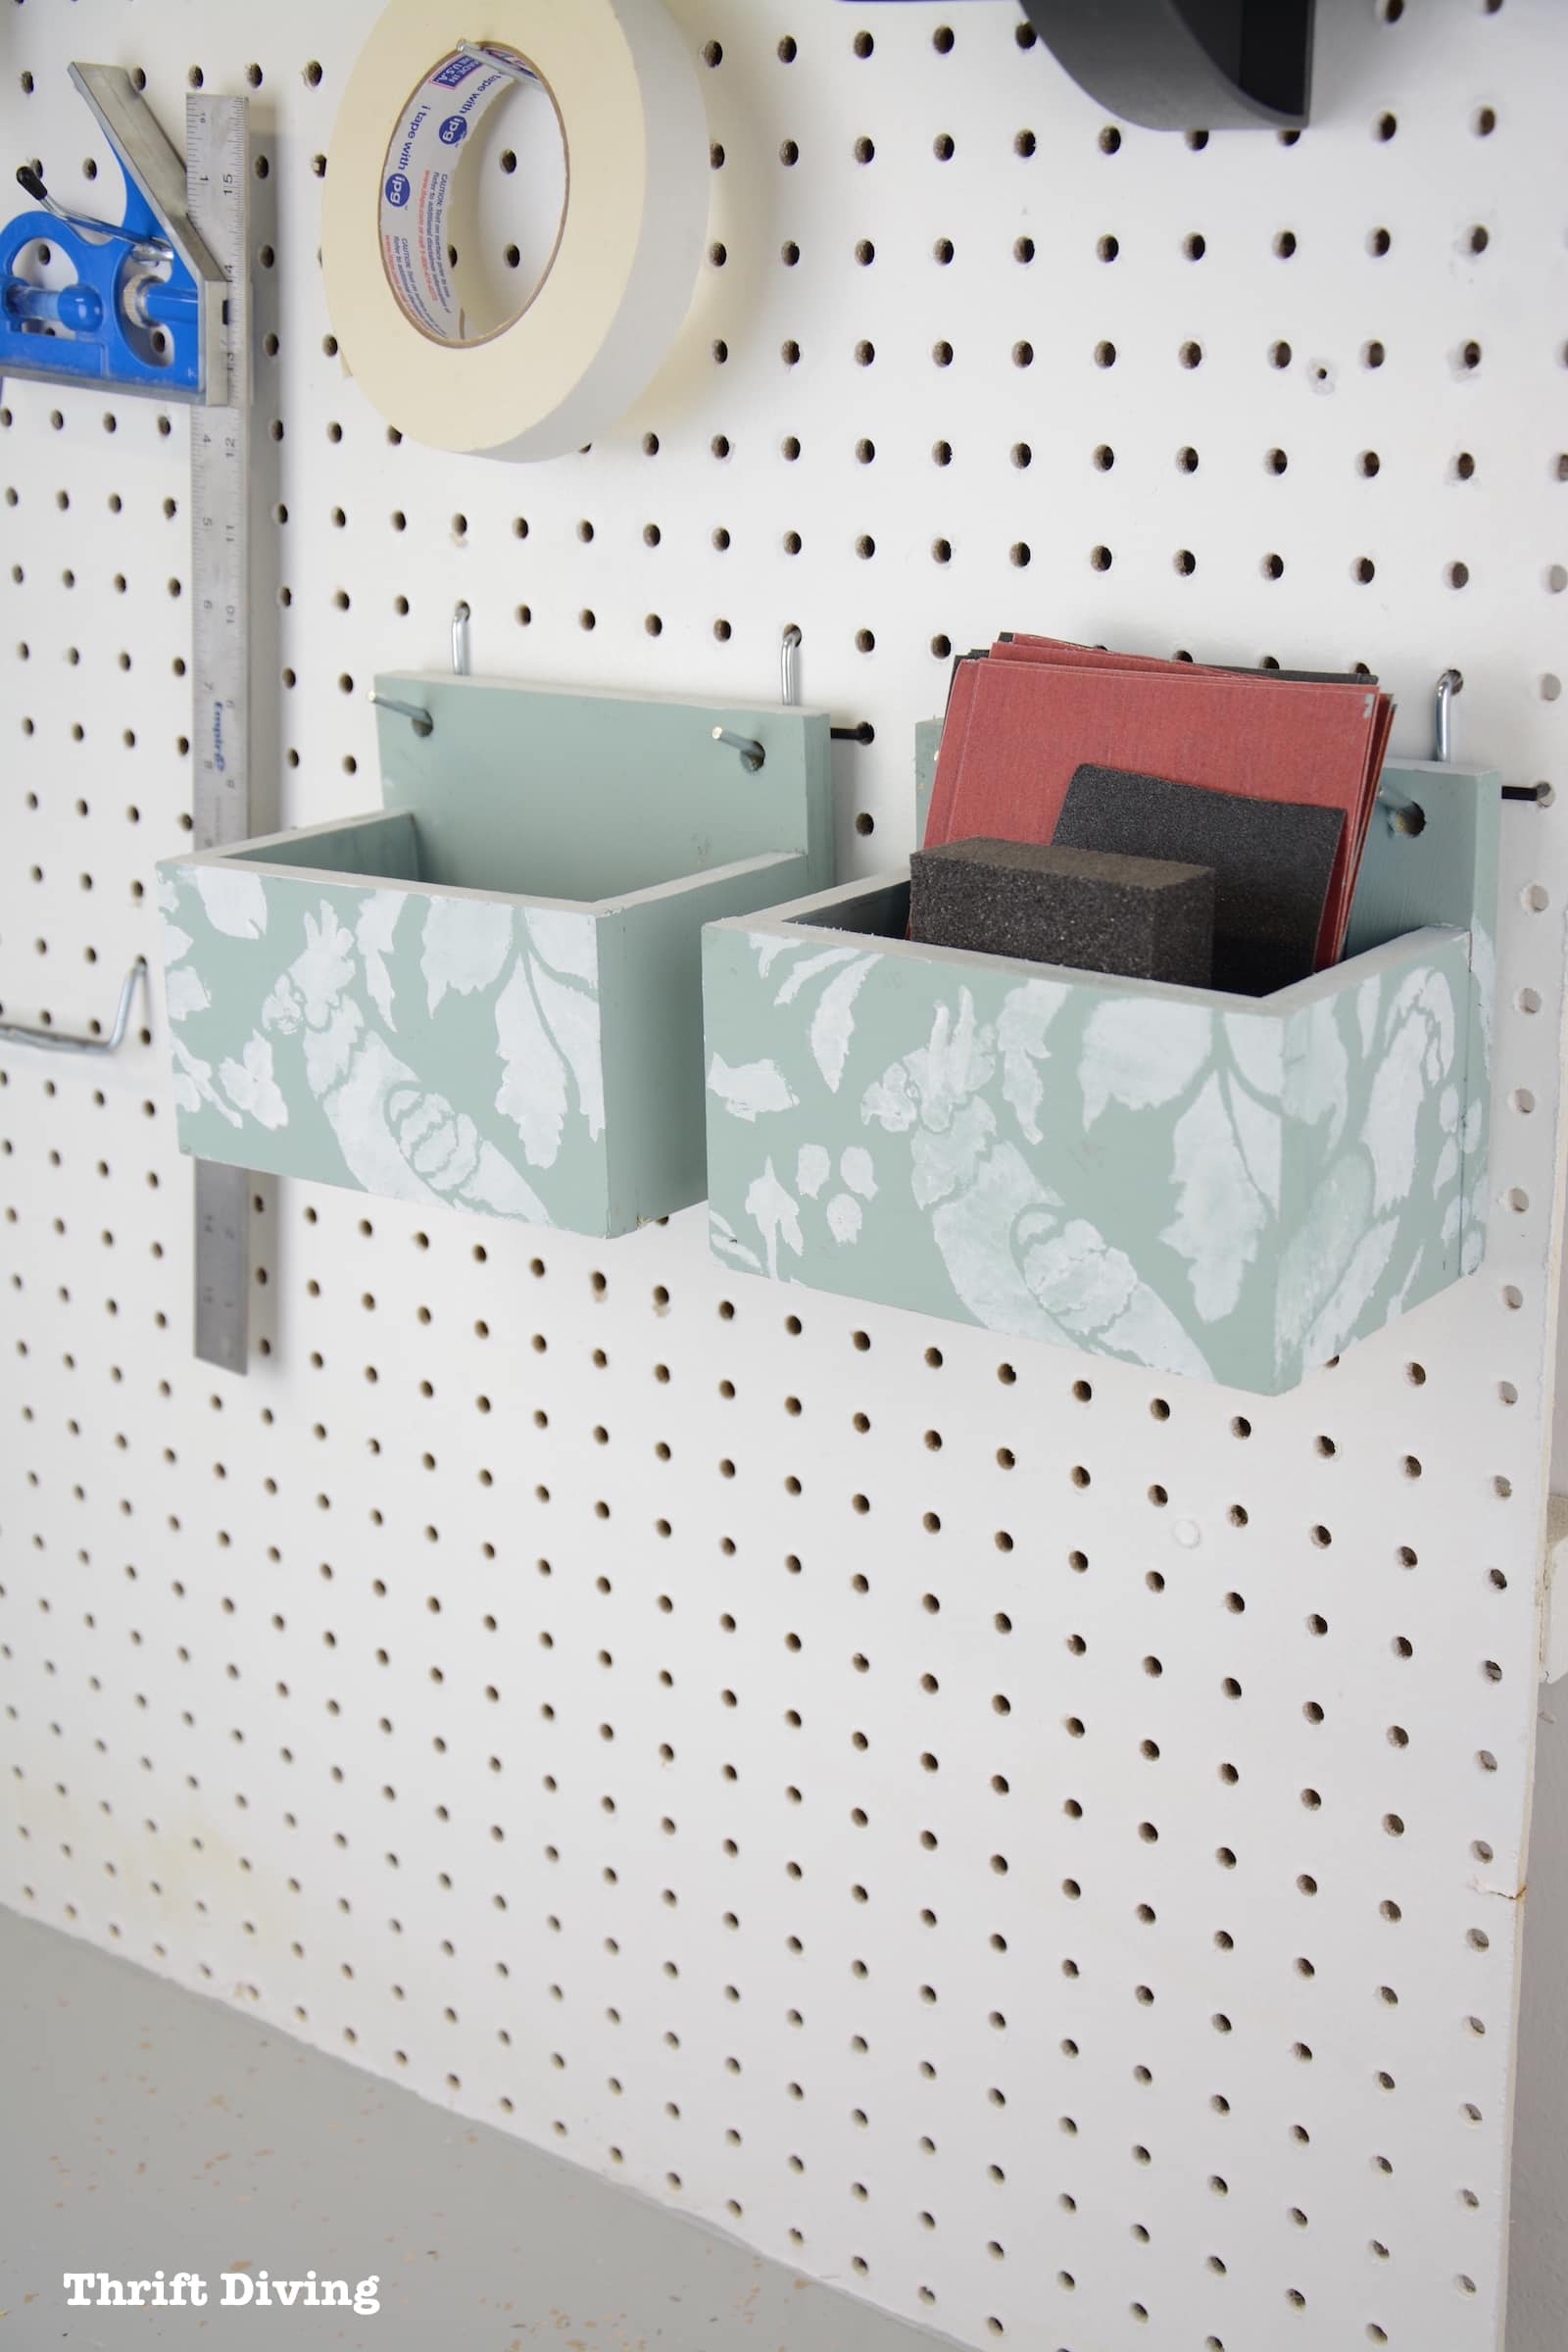 How to Make DIY Pegboard Organizers - HERO - Thrift Diving